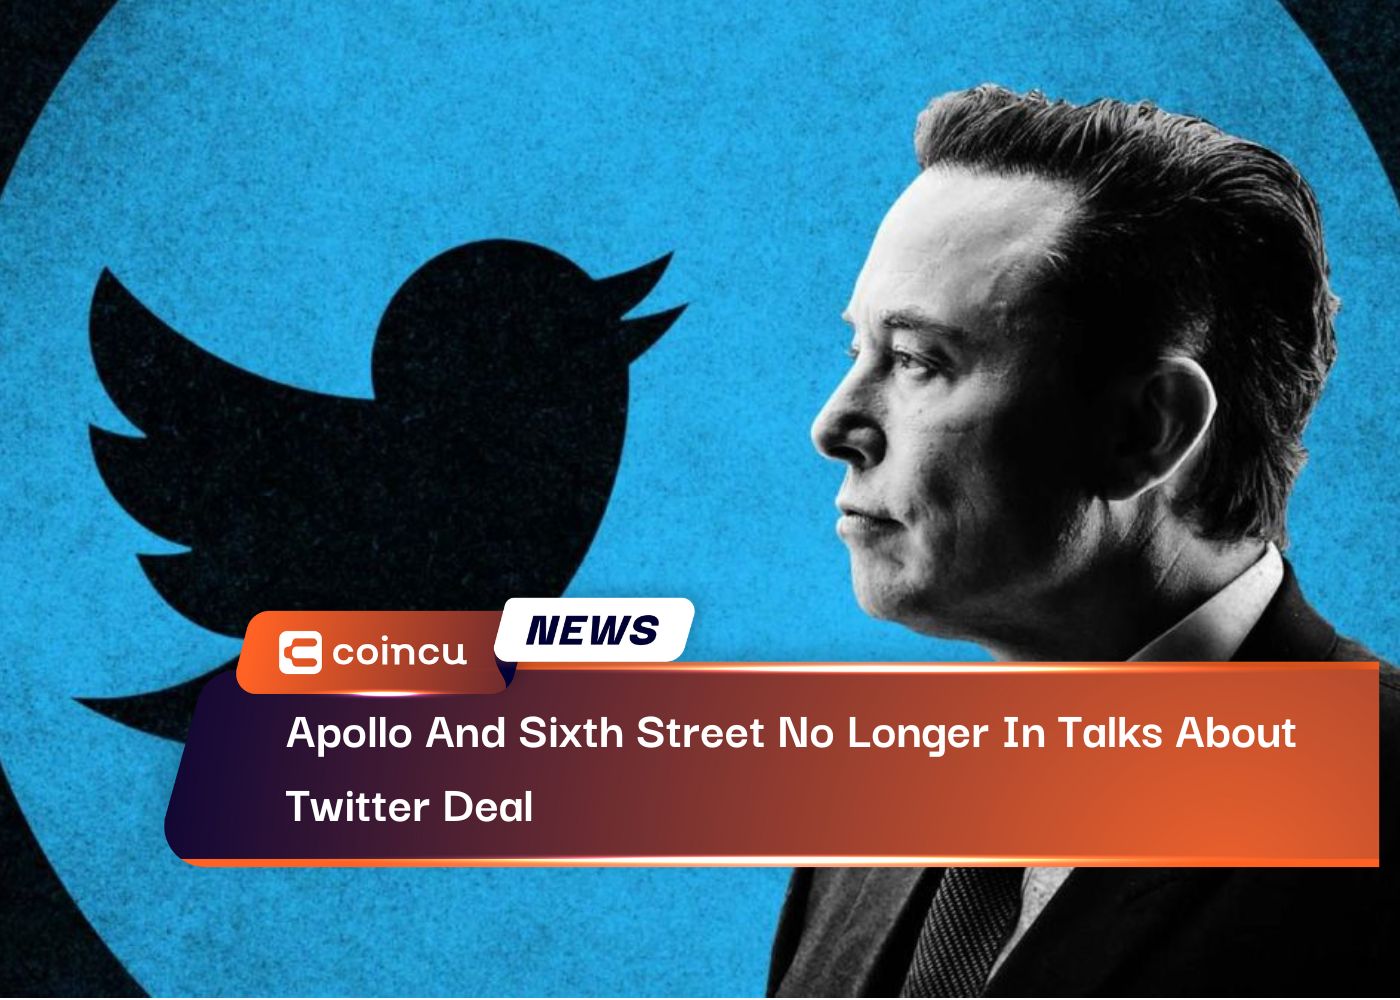 Apollo And Sixth Street - Twitter Deal